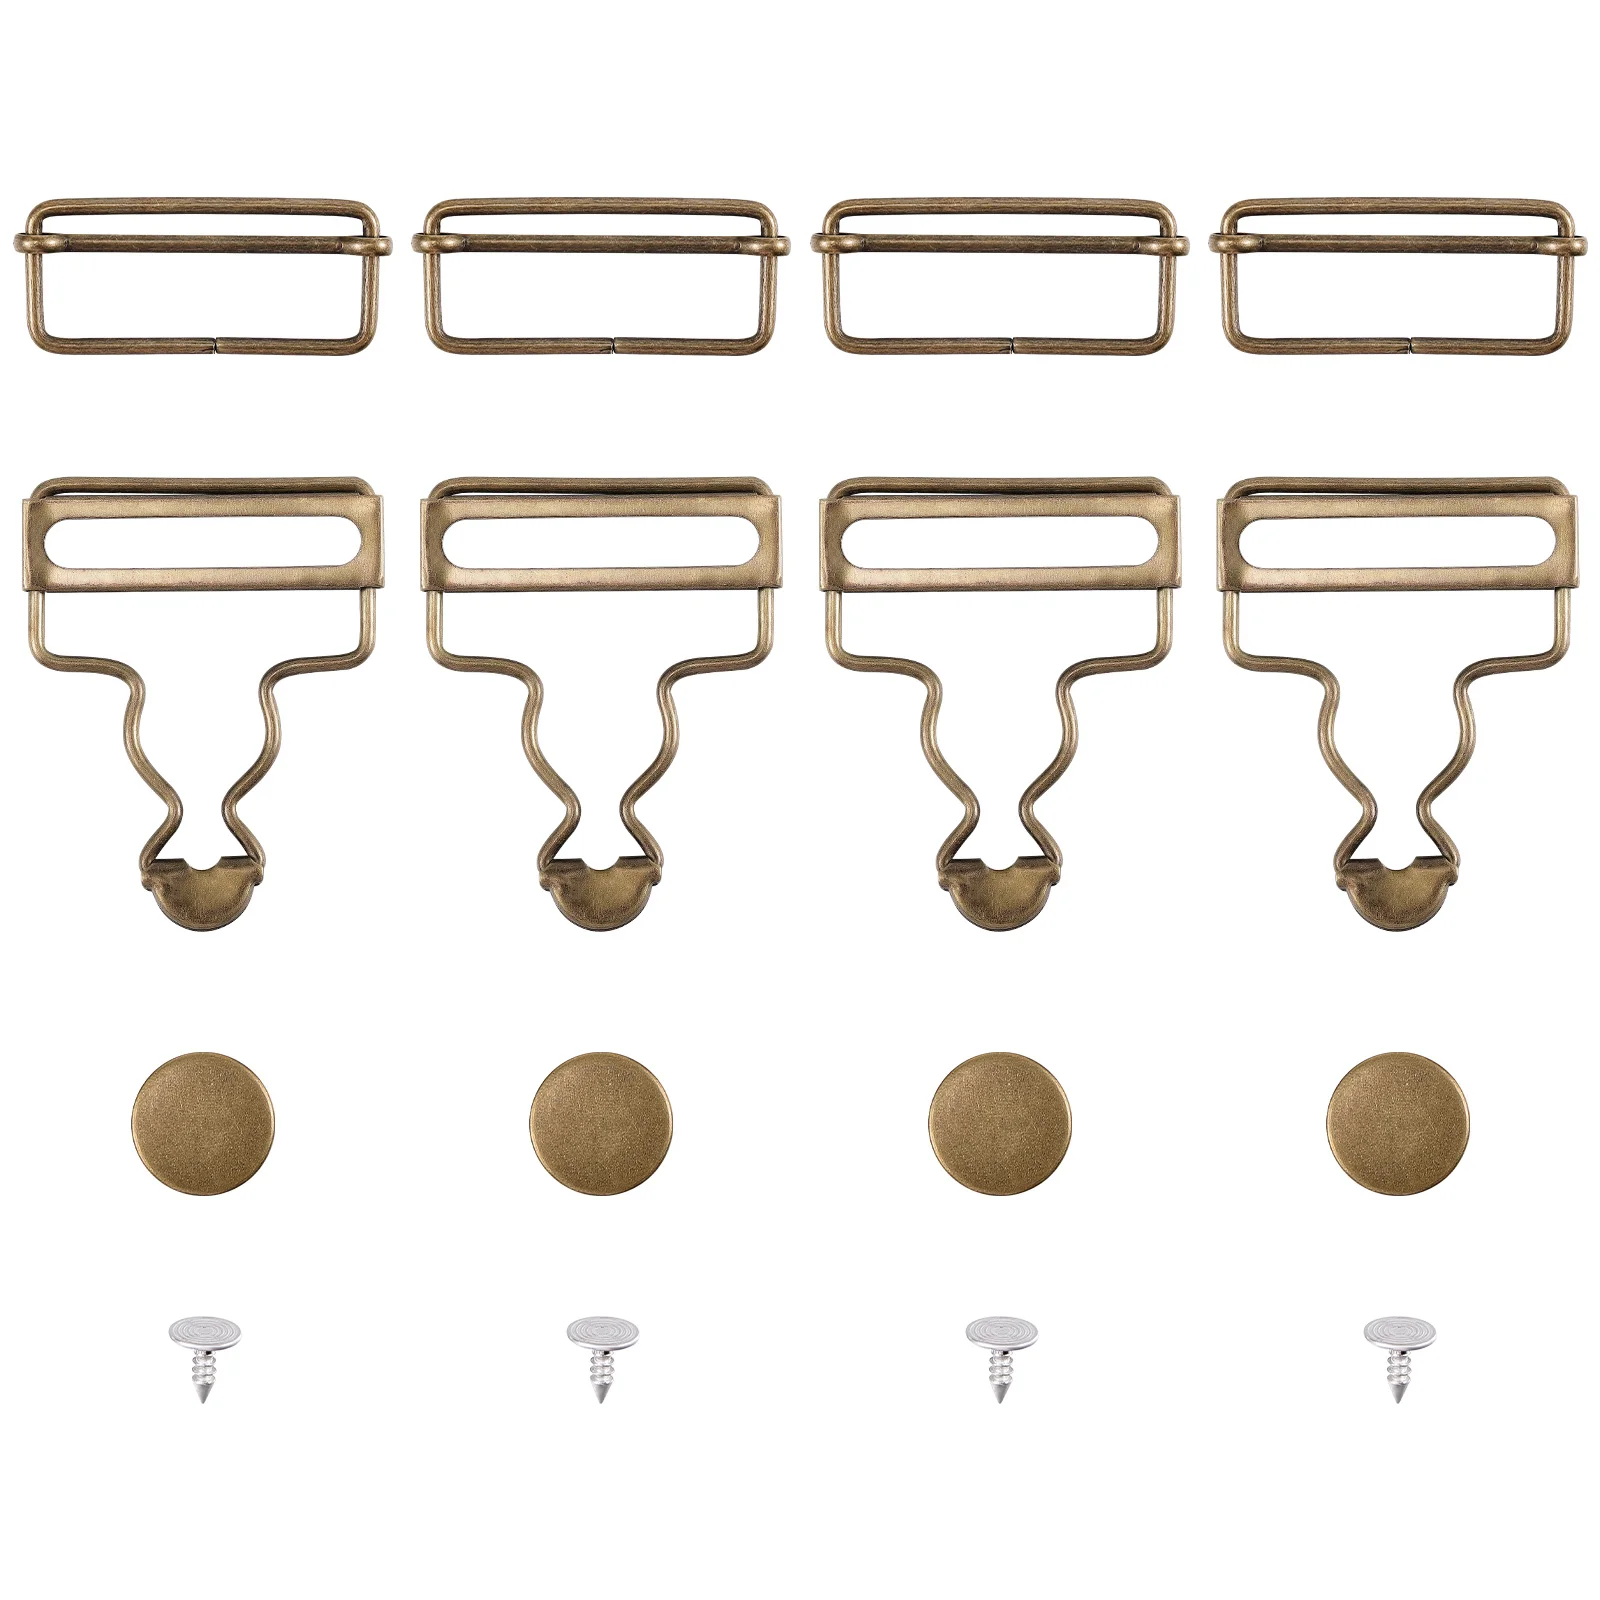 

Overall Buckles Replacement Suspender Buckle Metal Clips Hooks Overalls Buttons Clip Sew No Clasp Pants Bib Suspenders Button